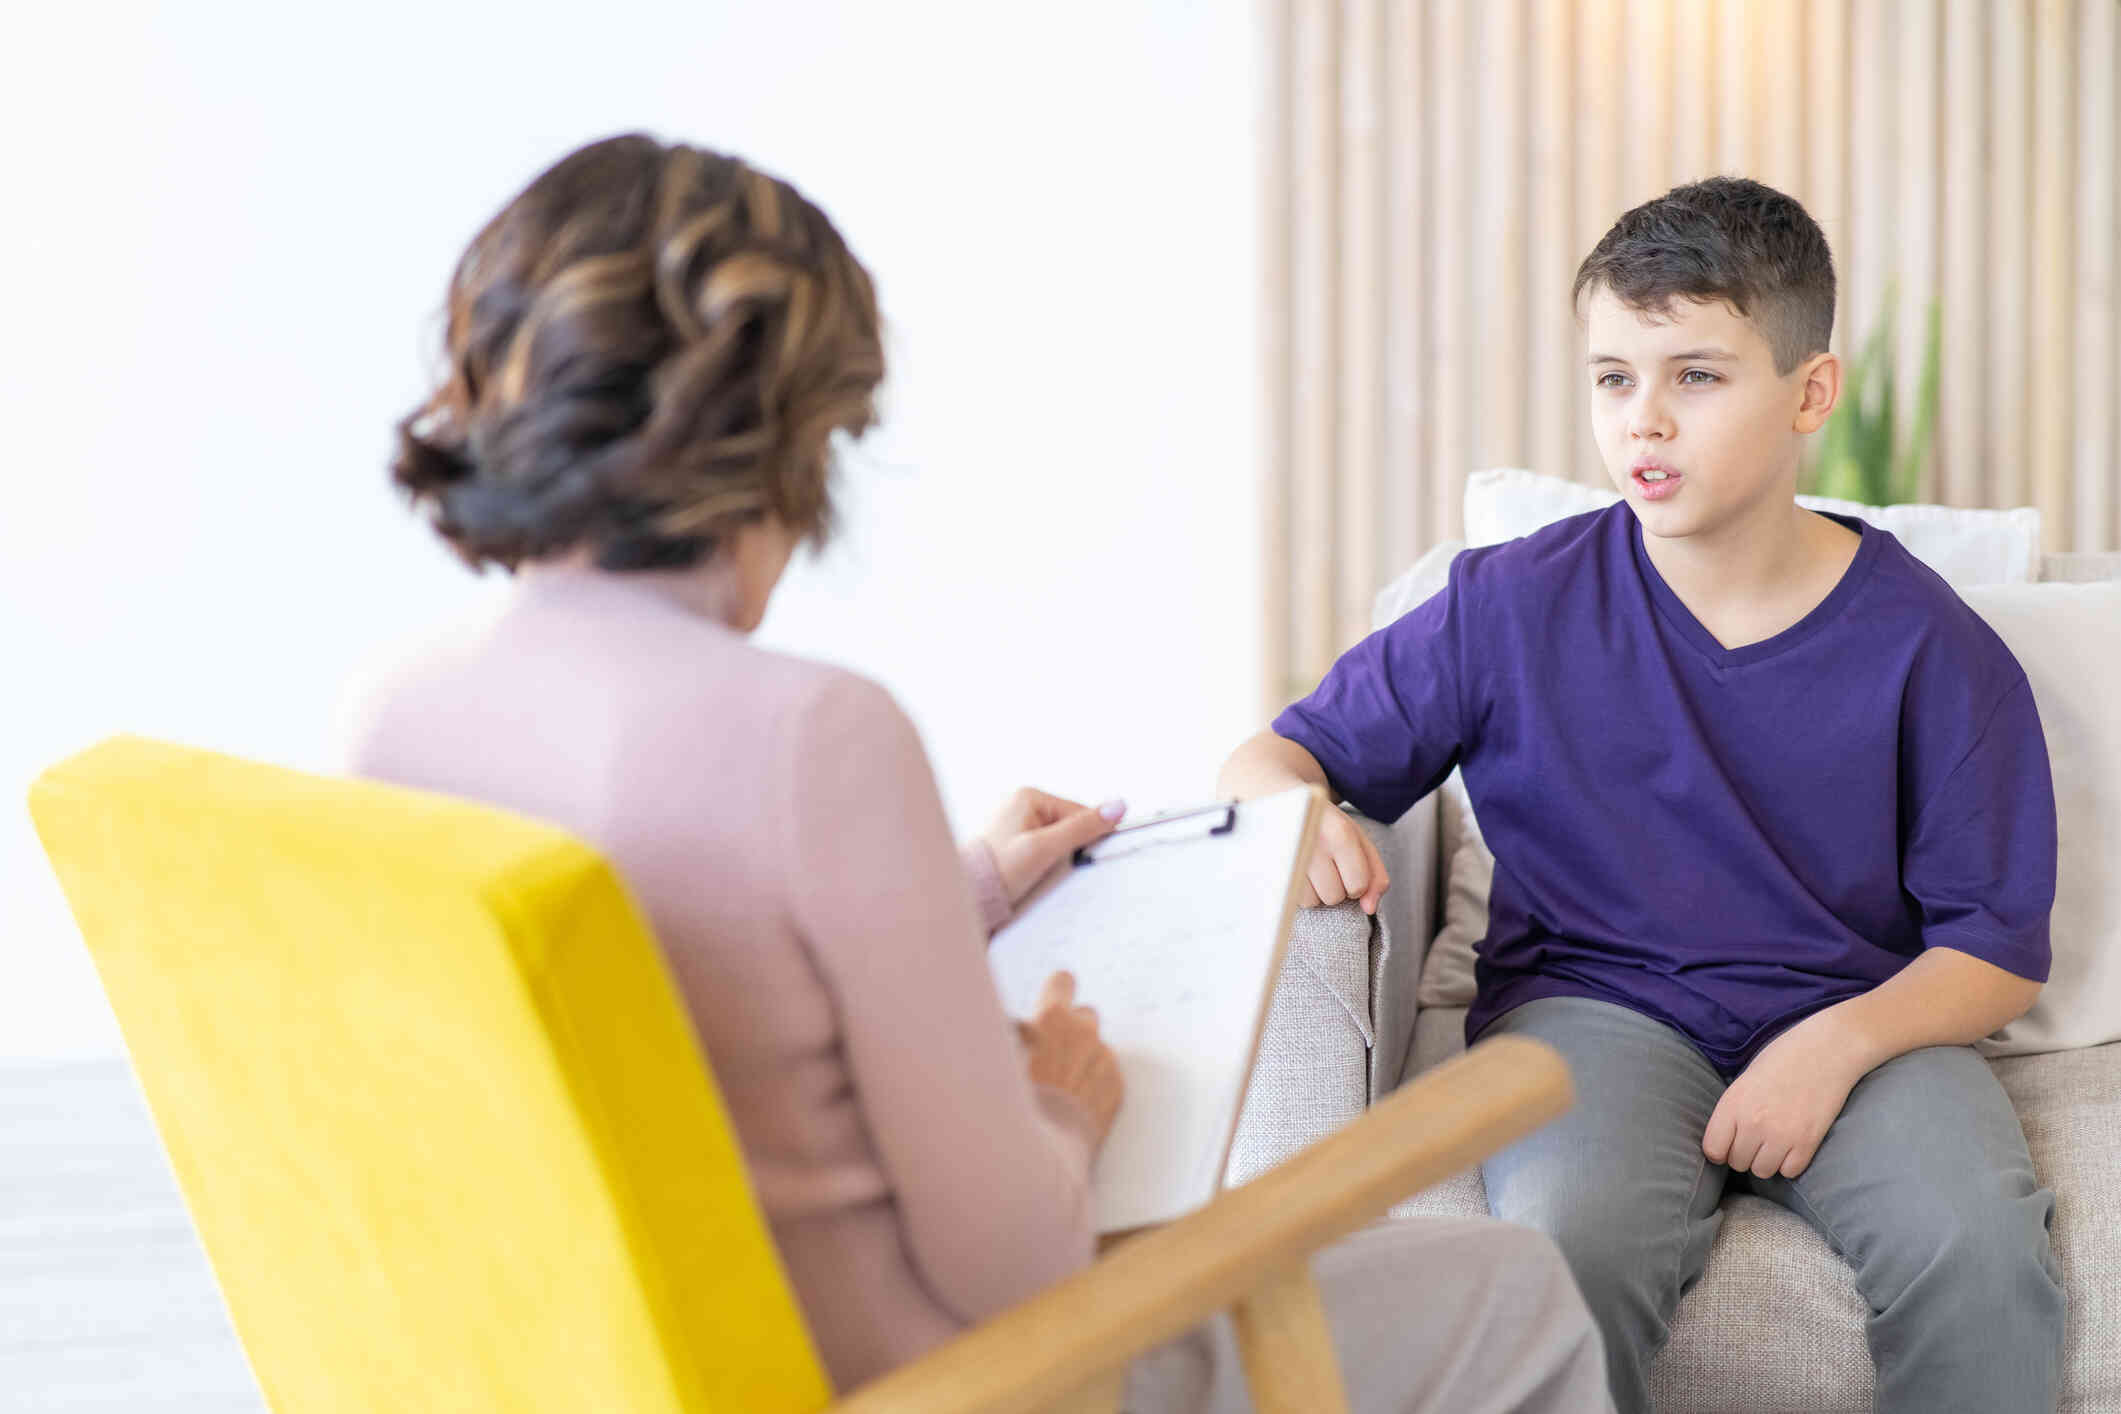 A boy in a purple shirt sits on a couch and talks to the female therapist sitting across from him during a therapy session.